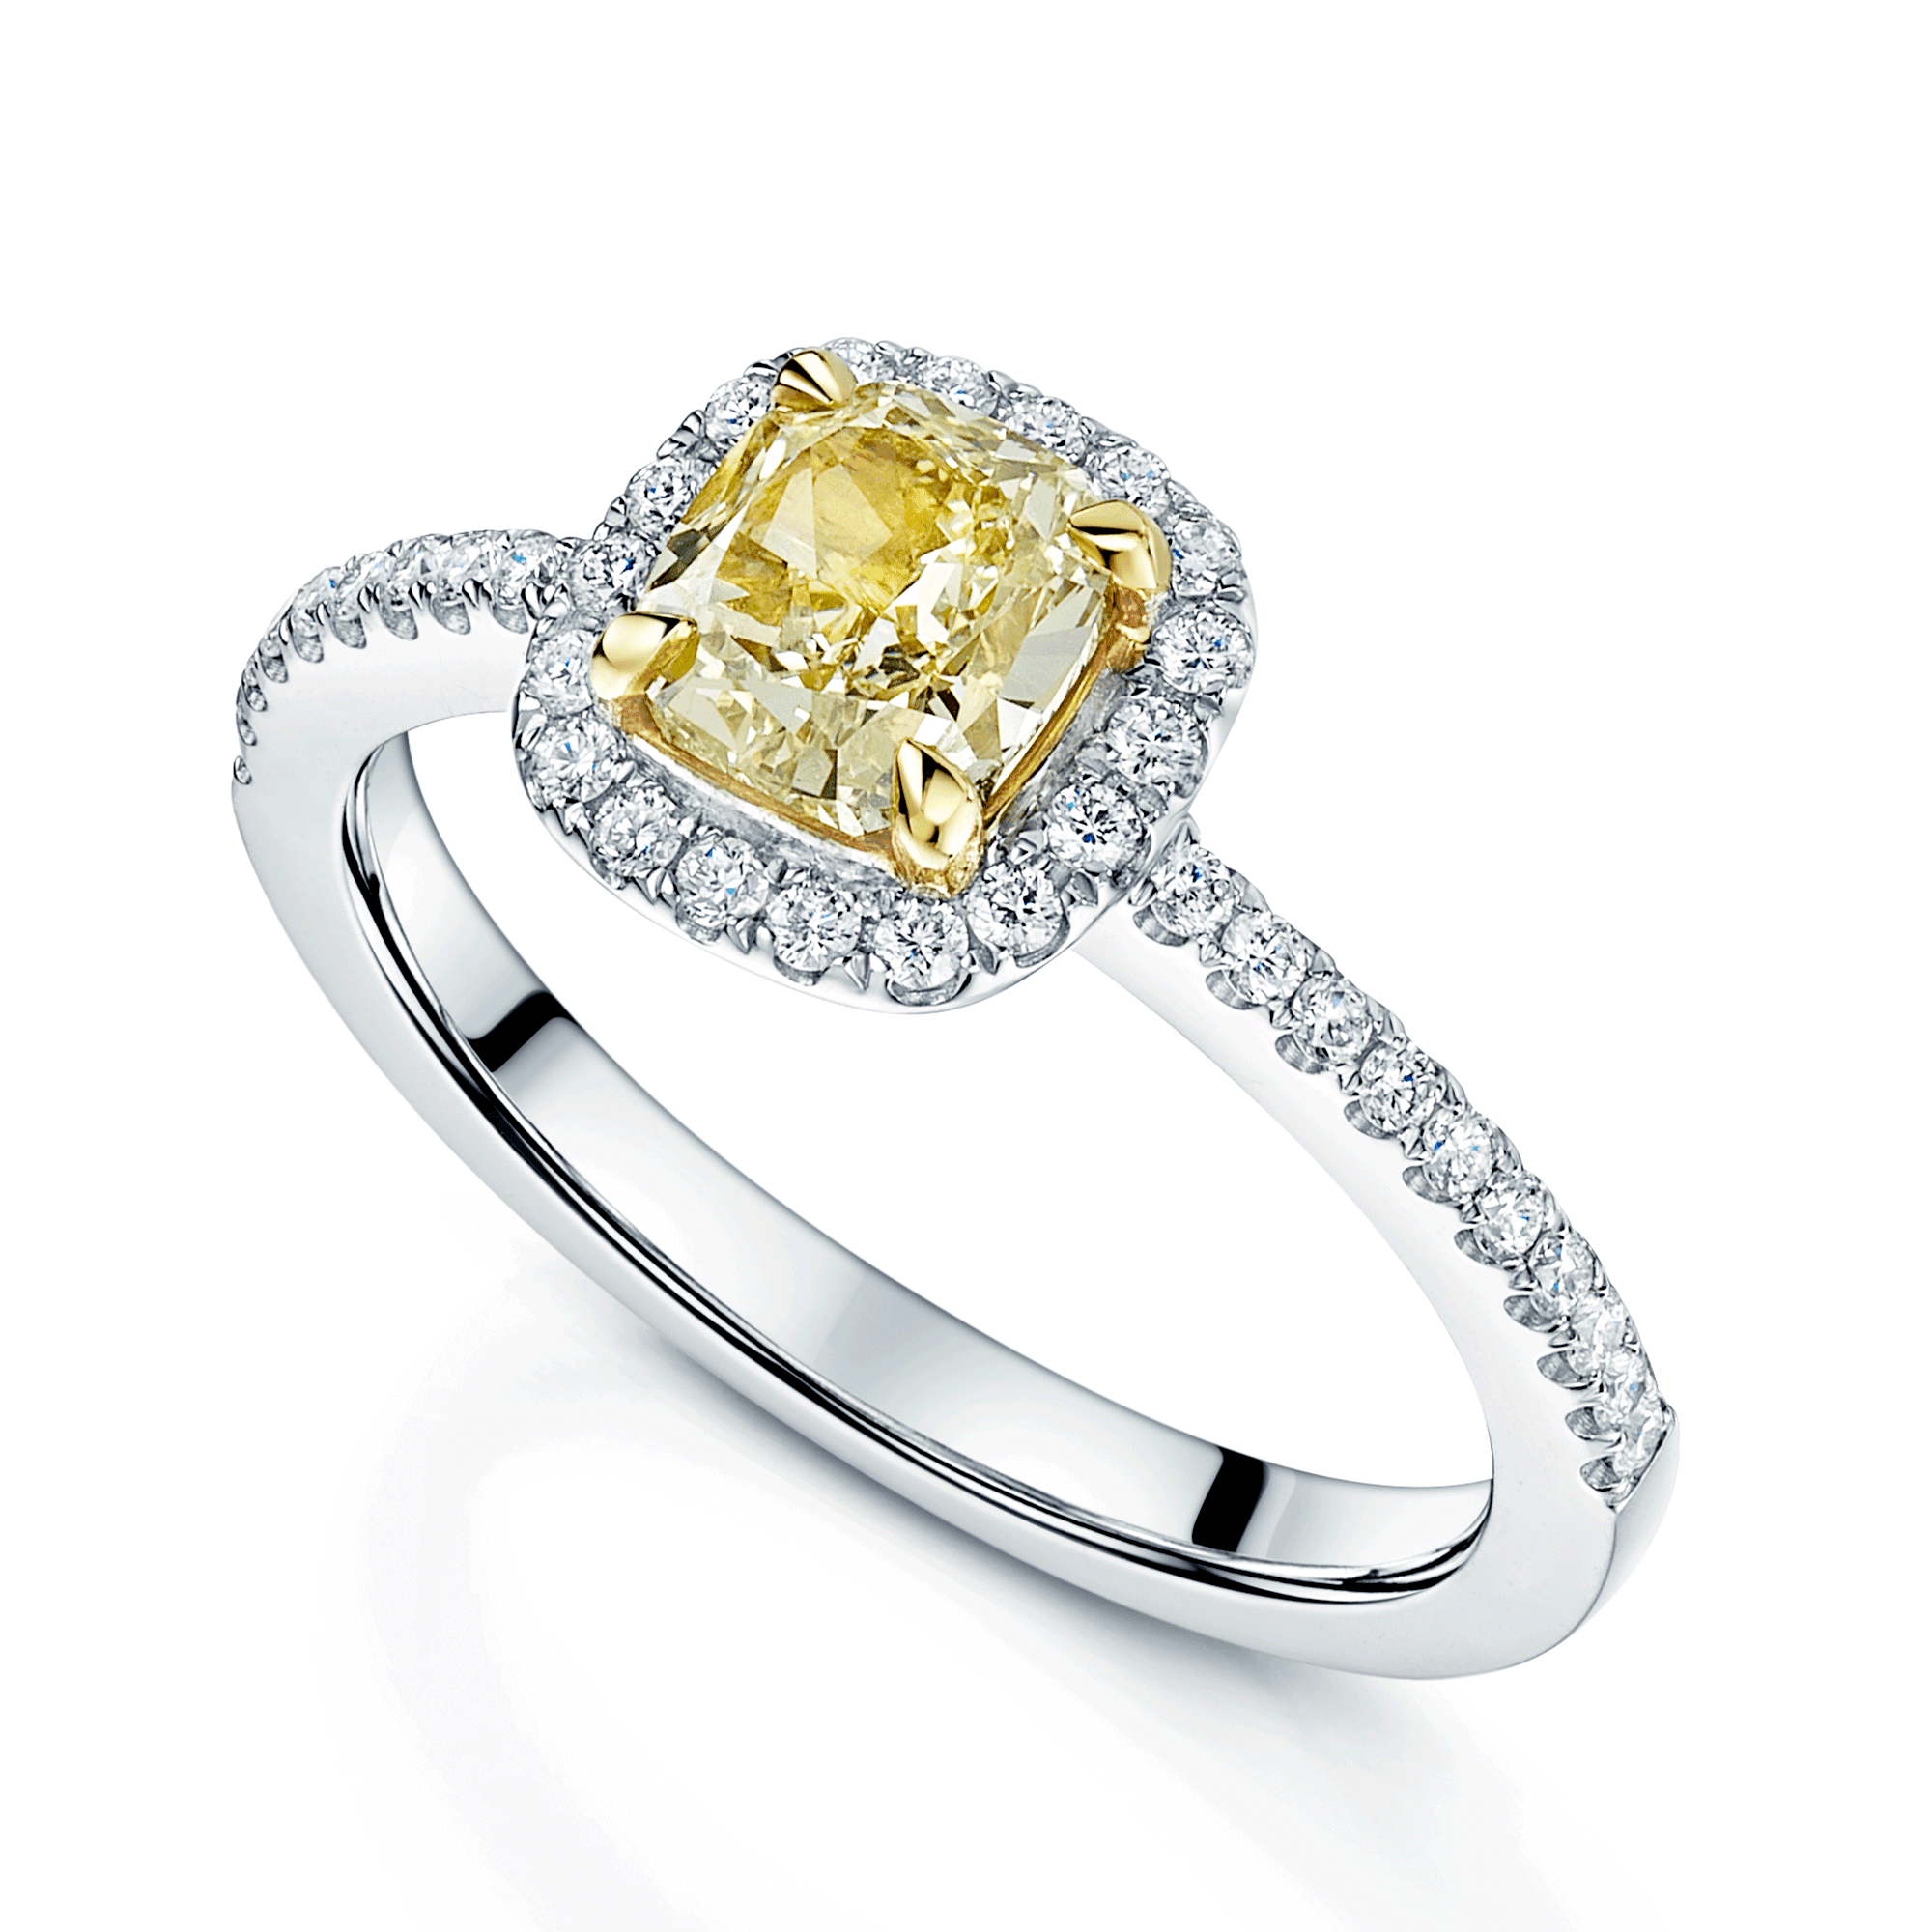 18ct White Gold GIA Certificated 1.09ct Cushion Shaped Fancy Yellow Diamond Halo Ring 0.26ct With Diamond Set Shoulders